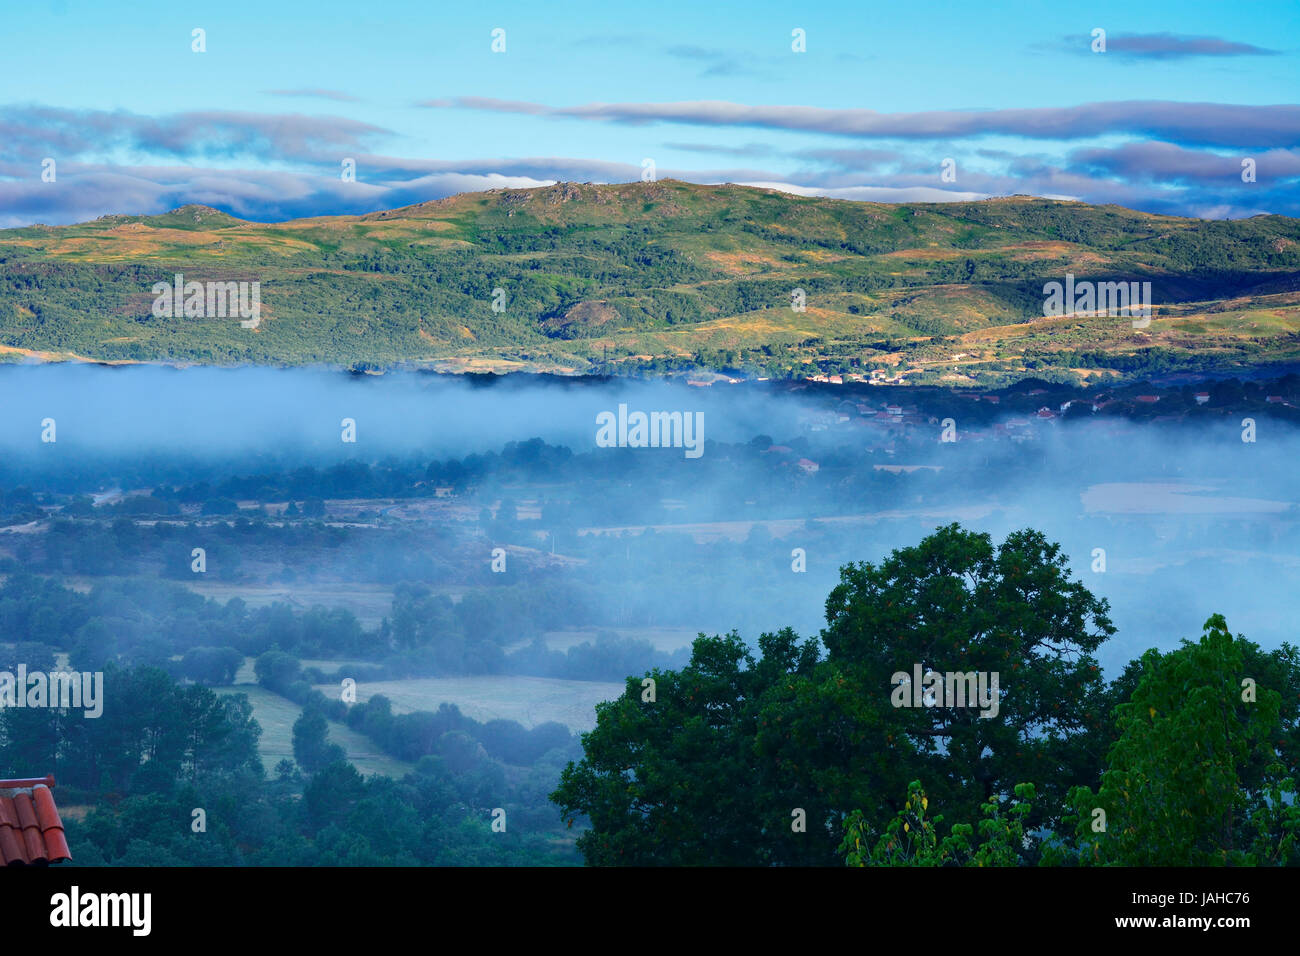 Cavado river valley in a misty morning. Montalegre, Portugal Stock Photo